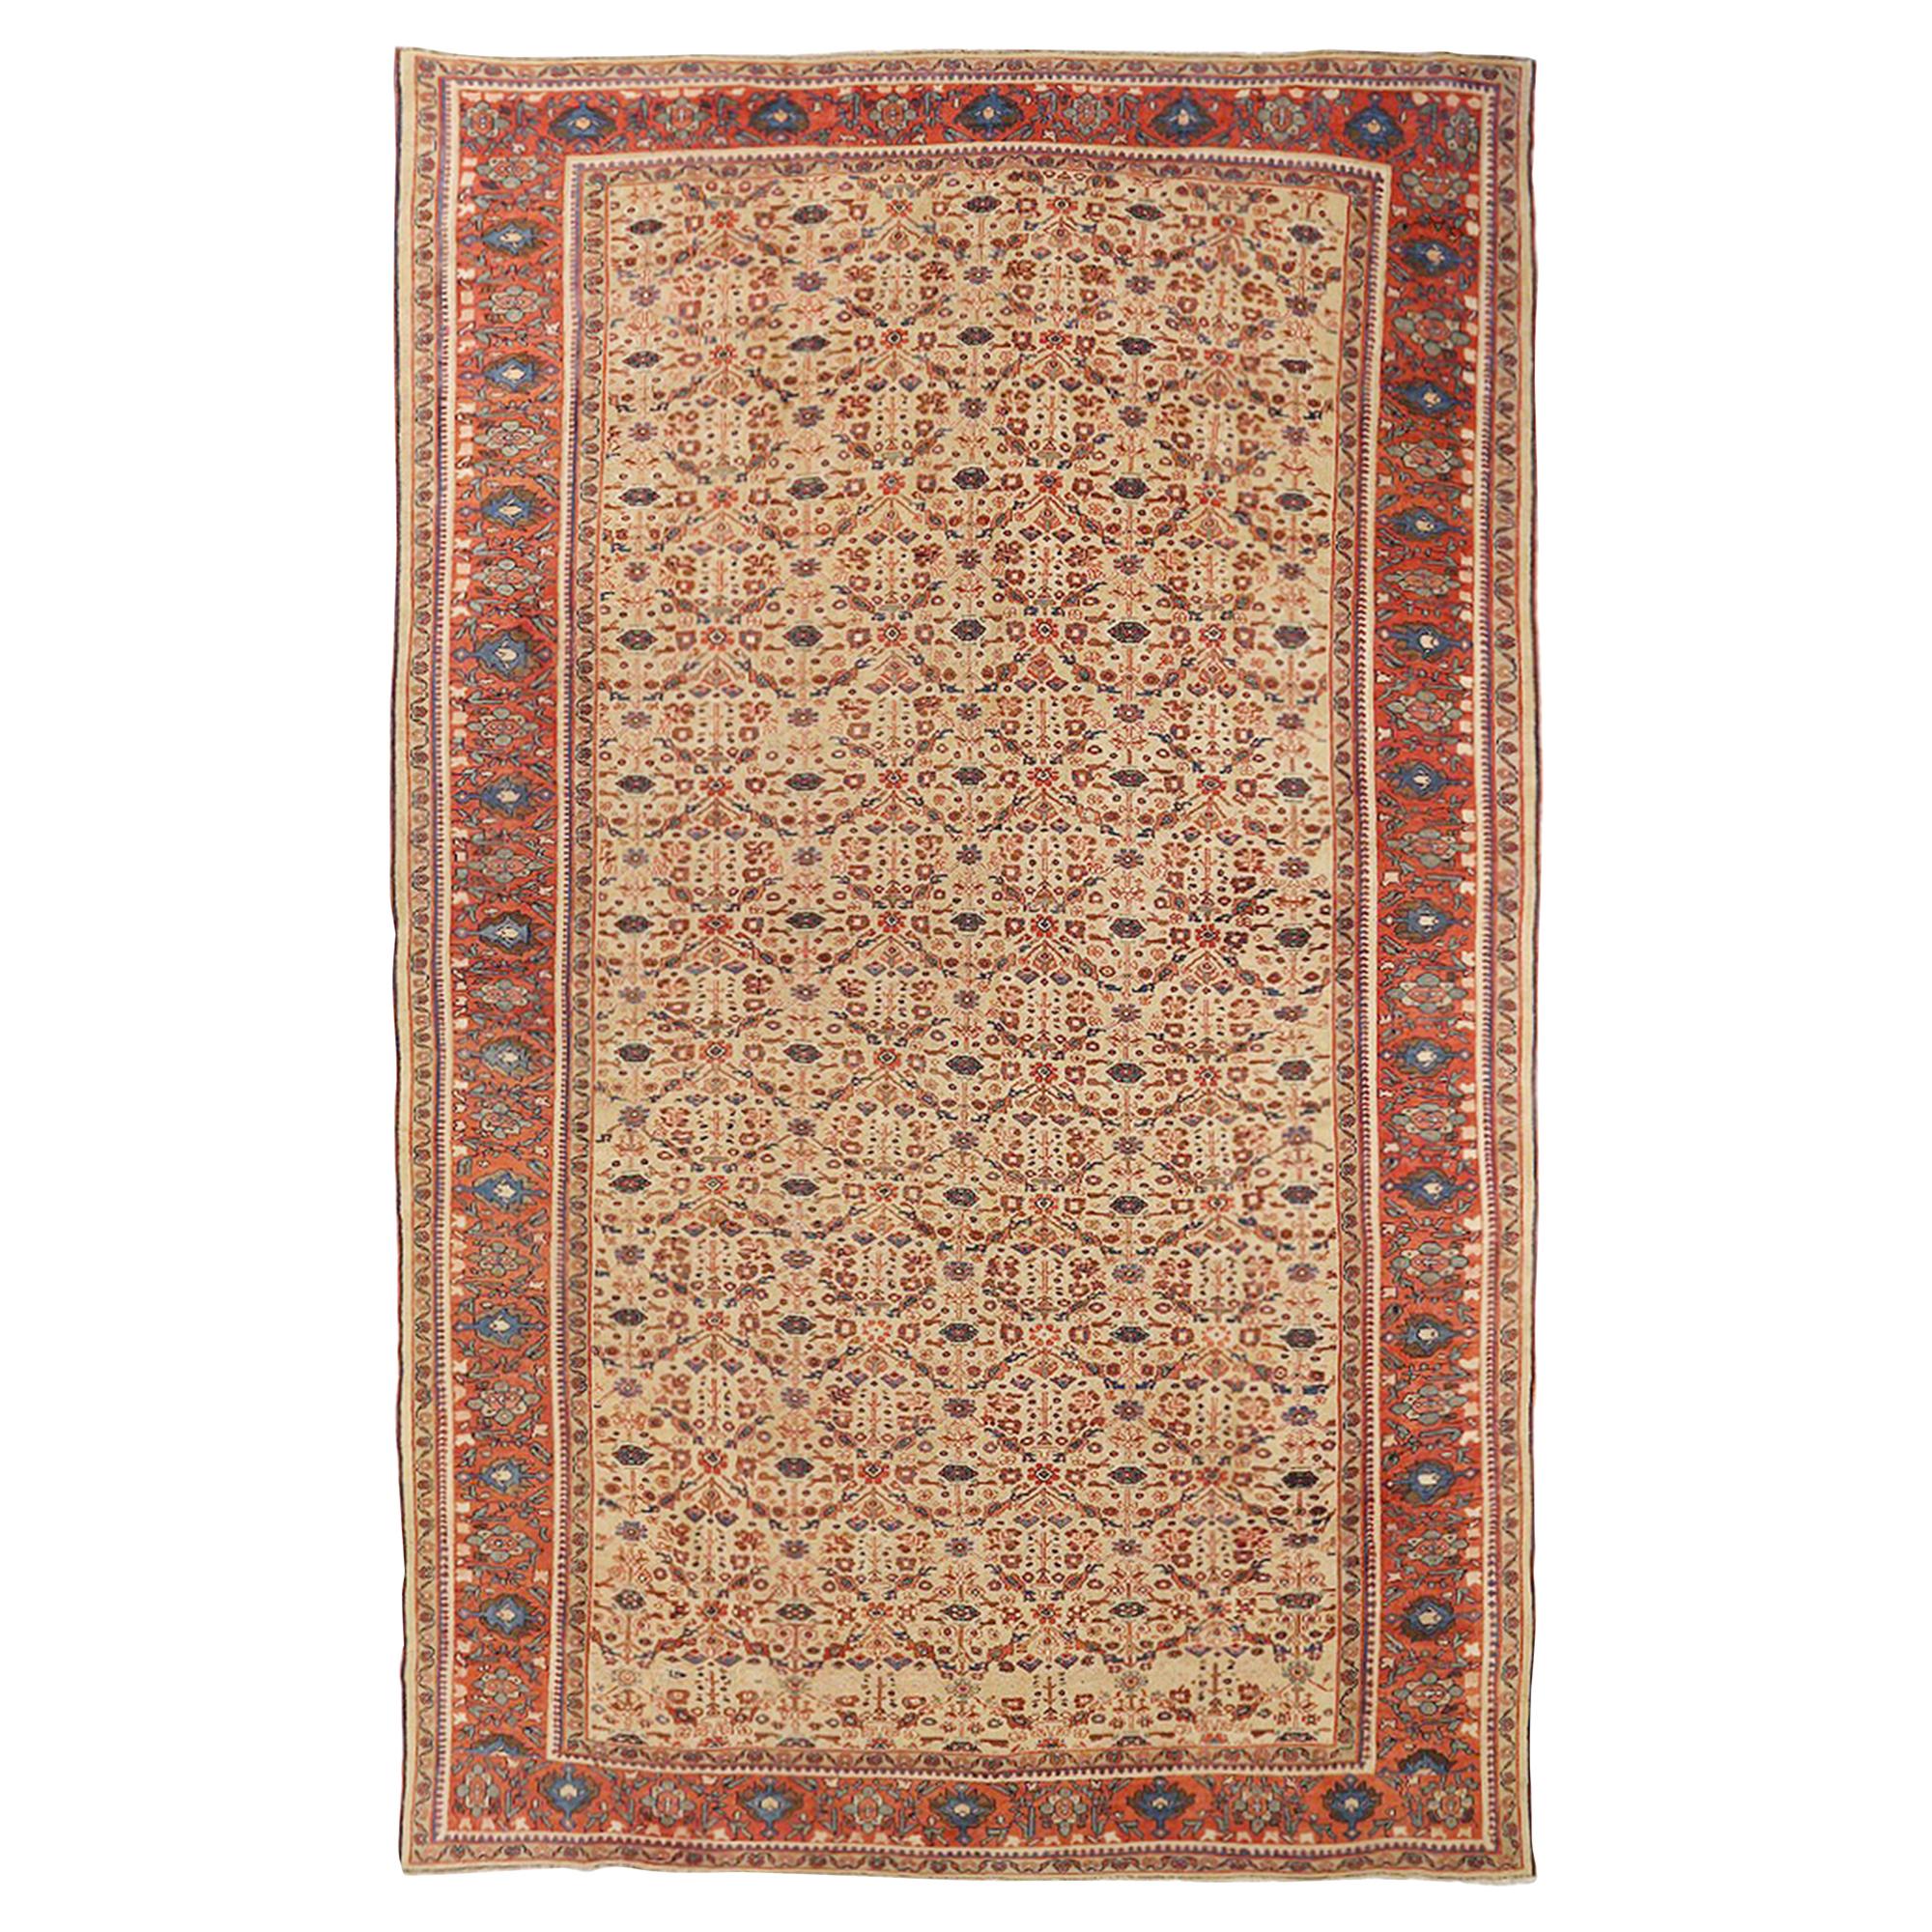 1910 Antique Persian Sultanabad Rug with Navy & Red Floral Motif on Ivory Field